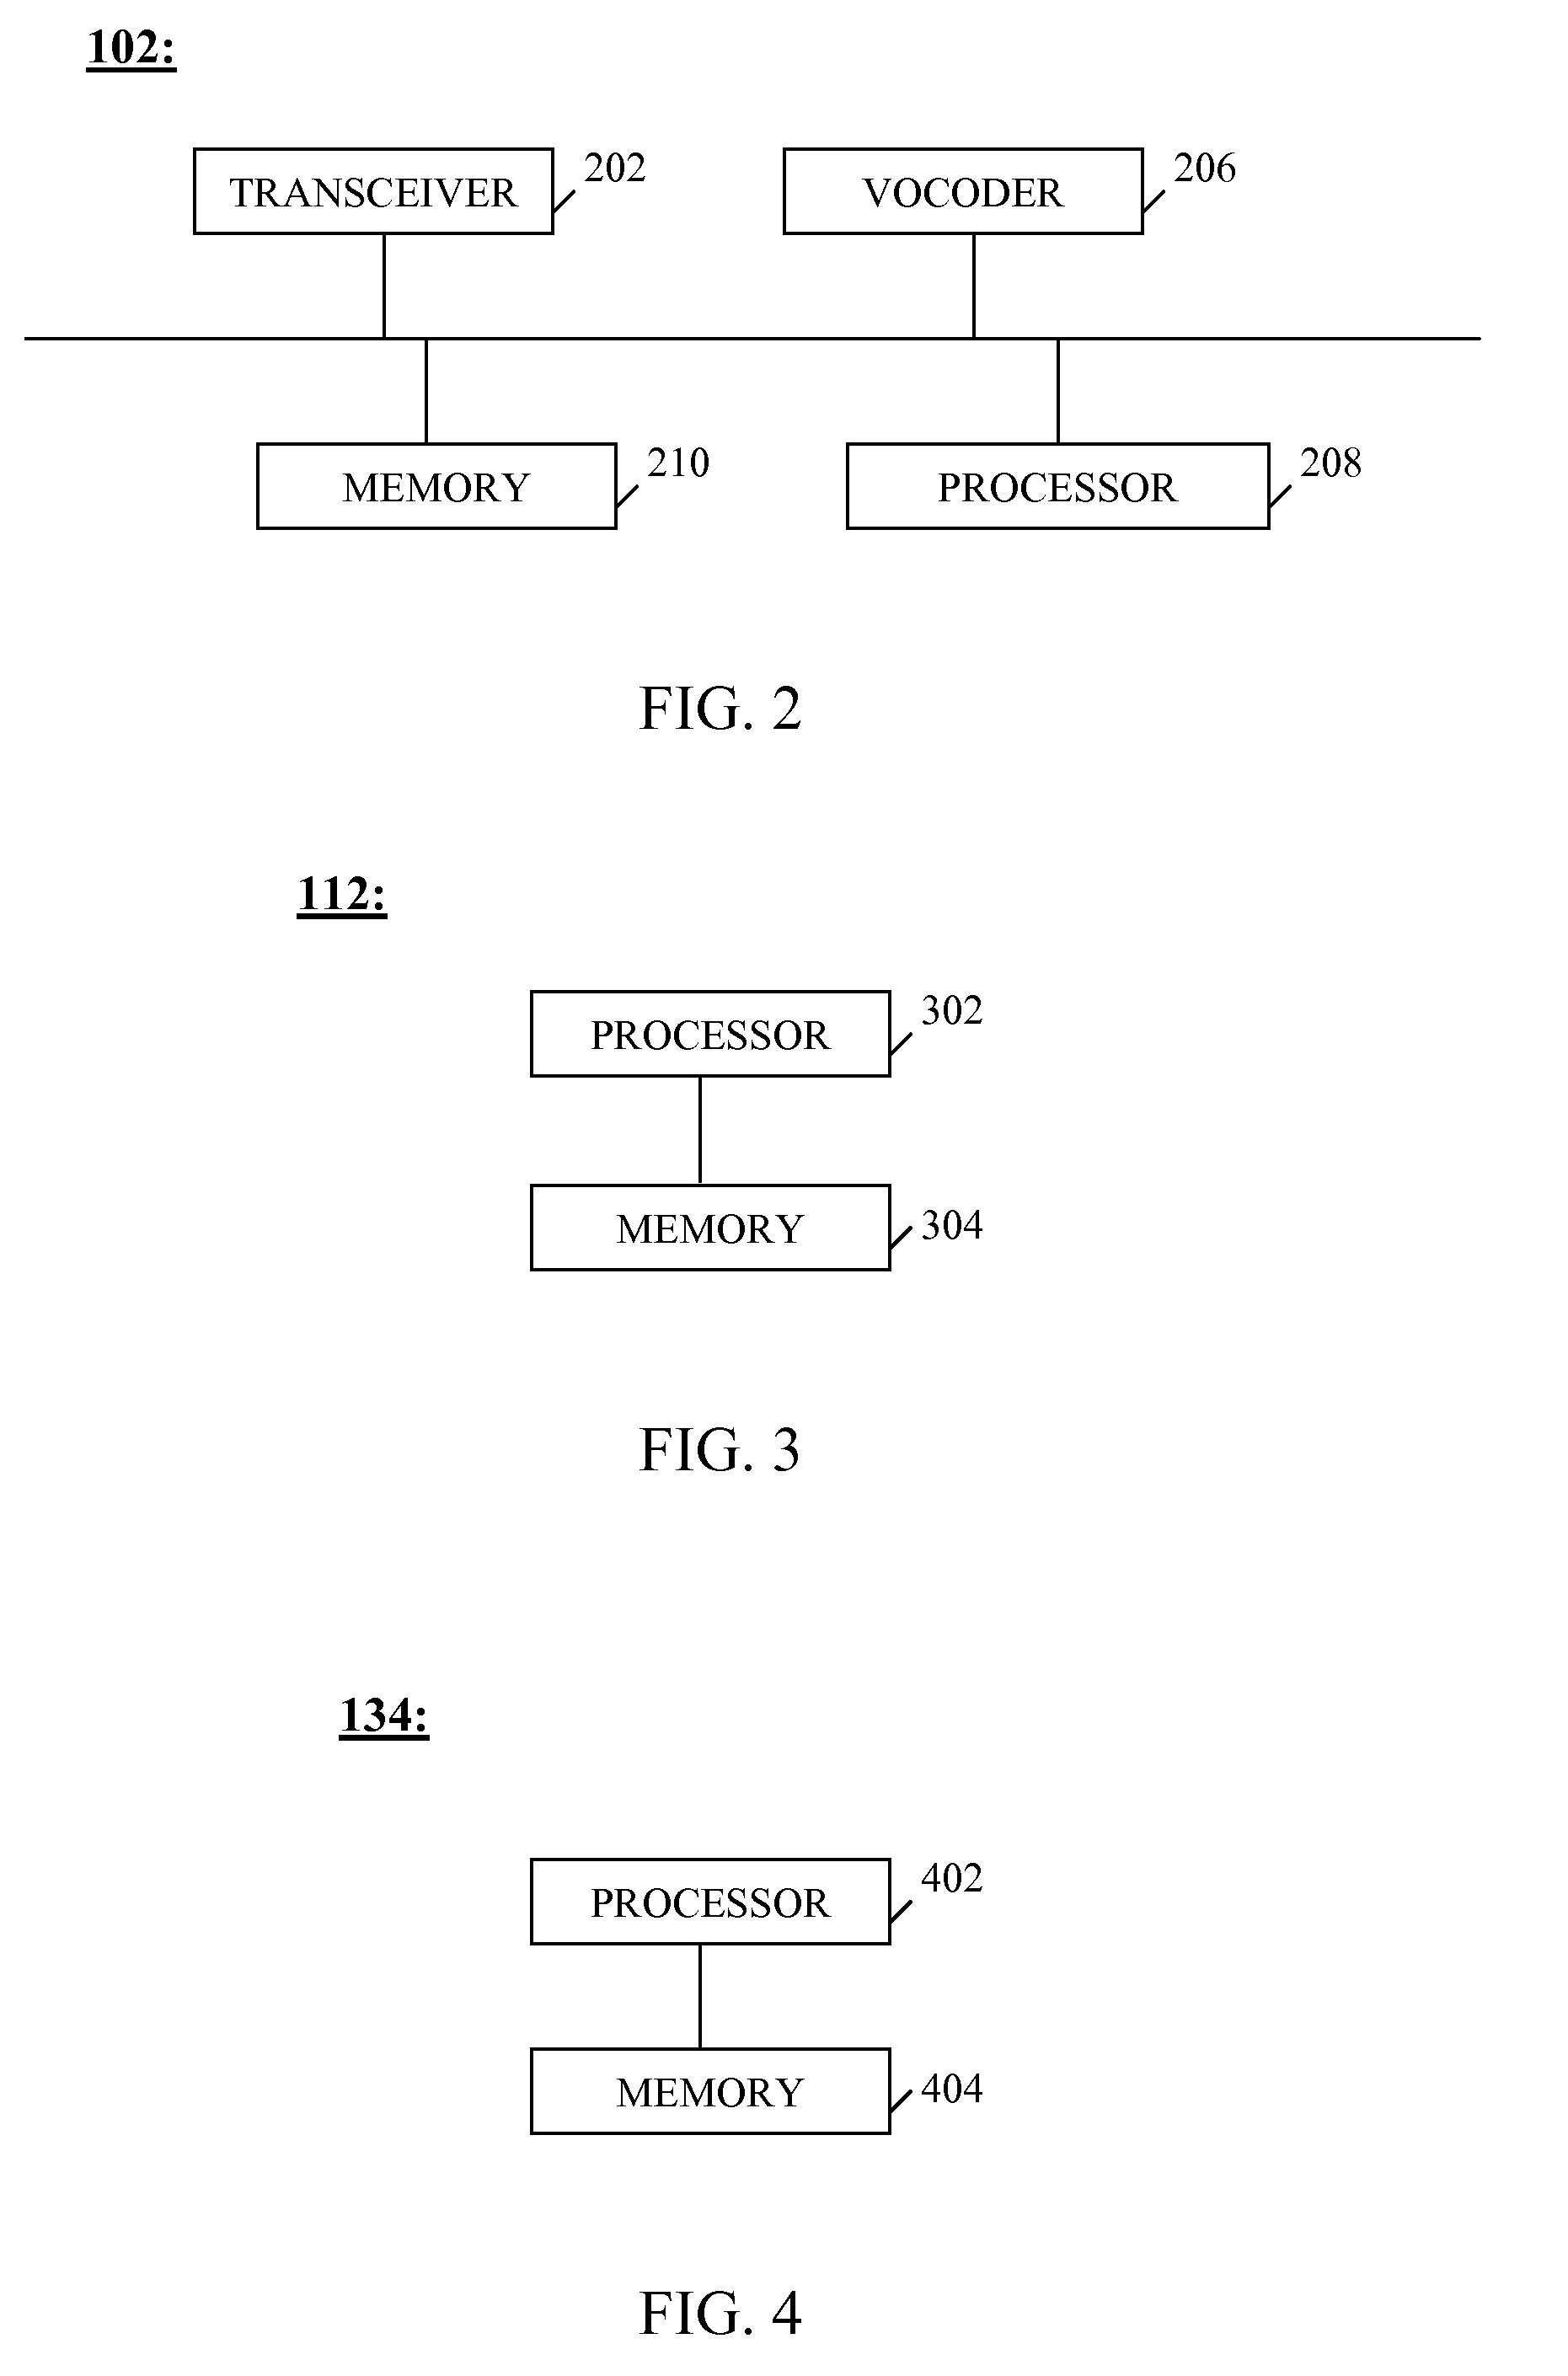 Method and system for intertechnology handoff of a hybrid access terminal